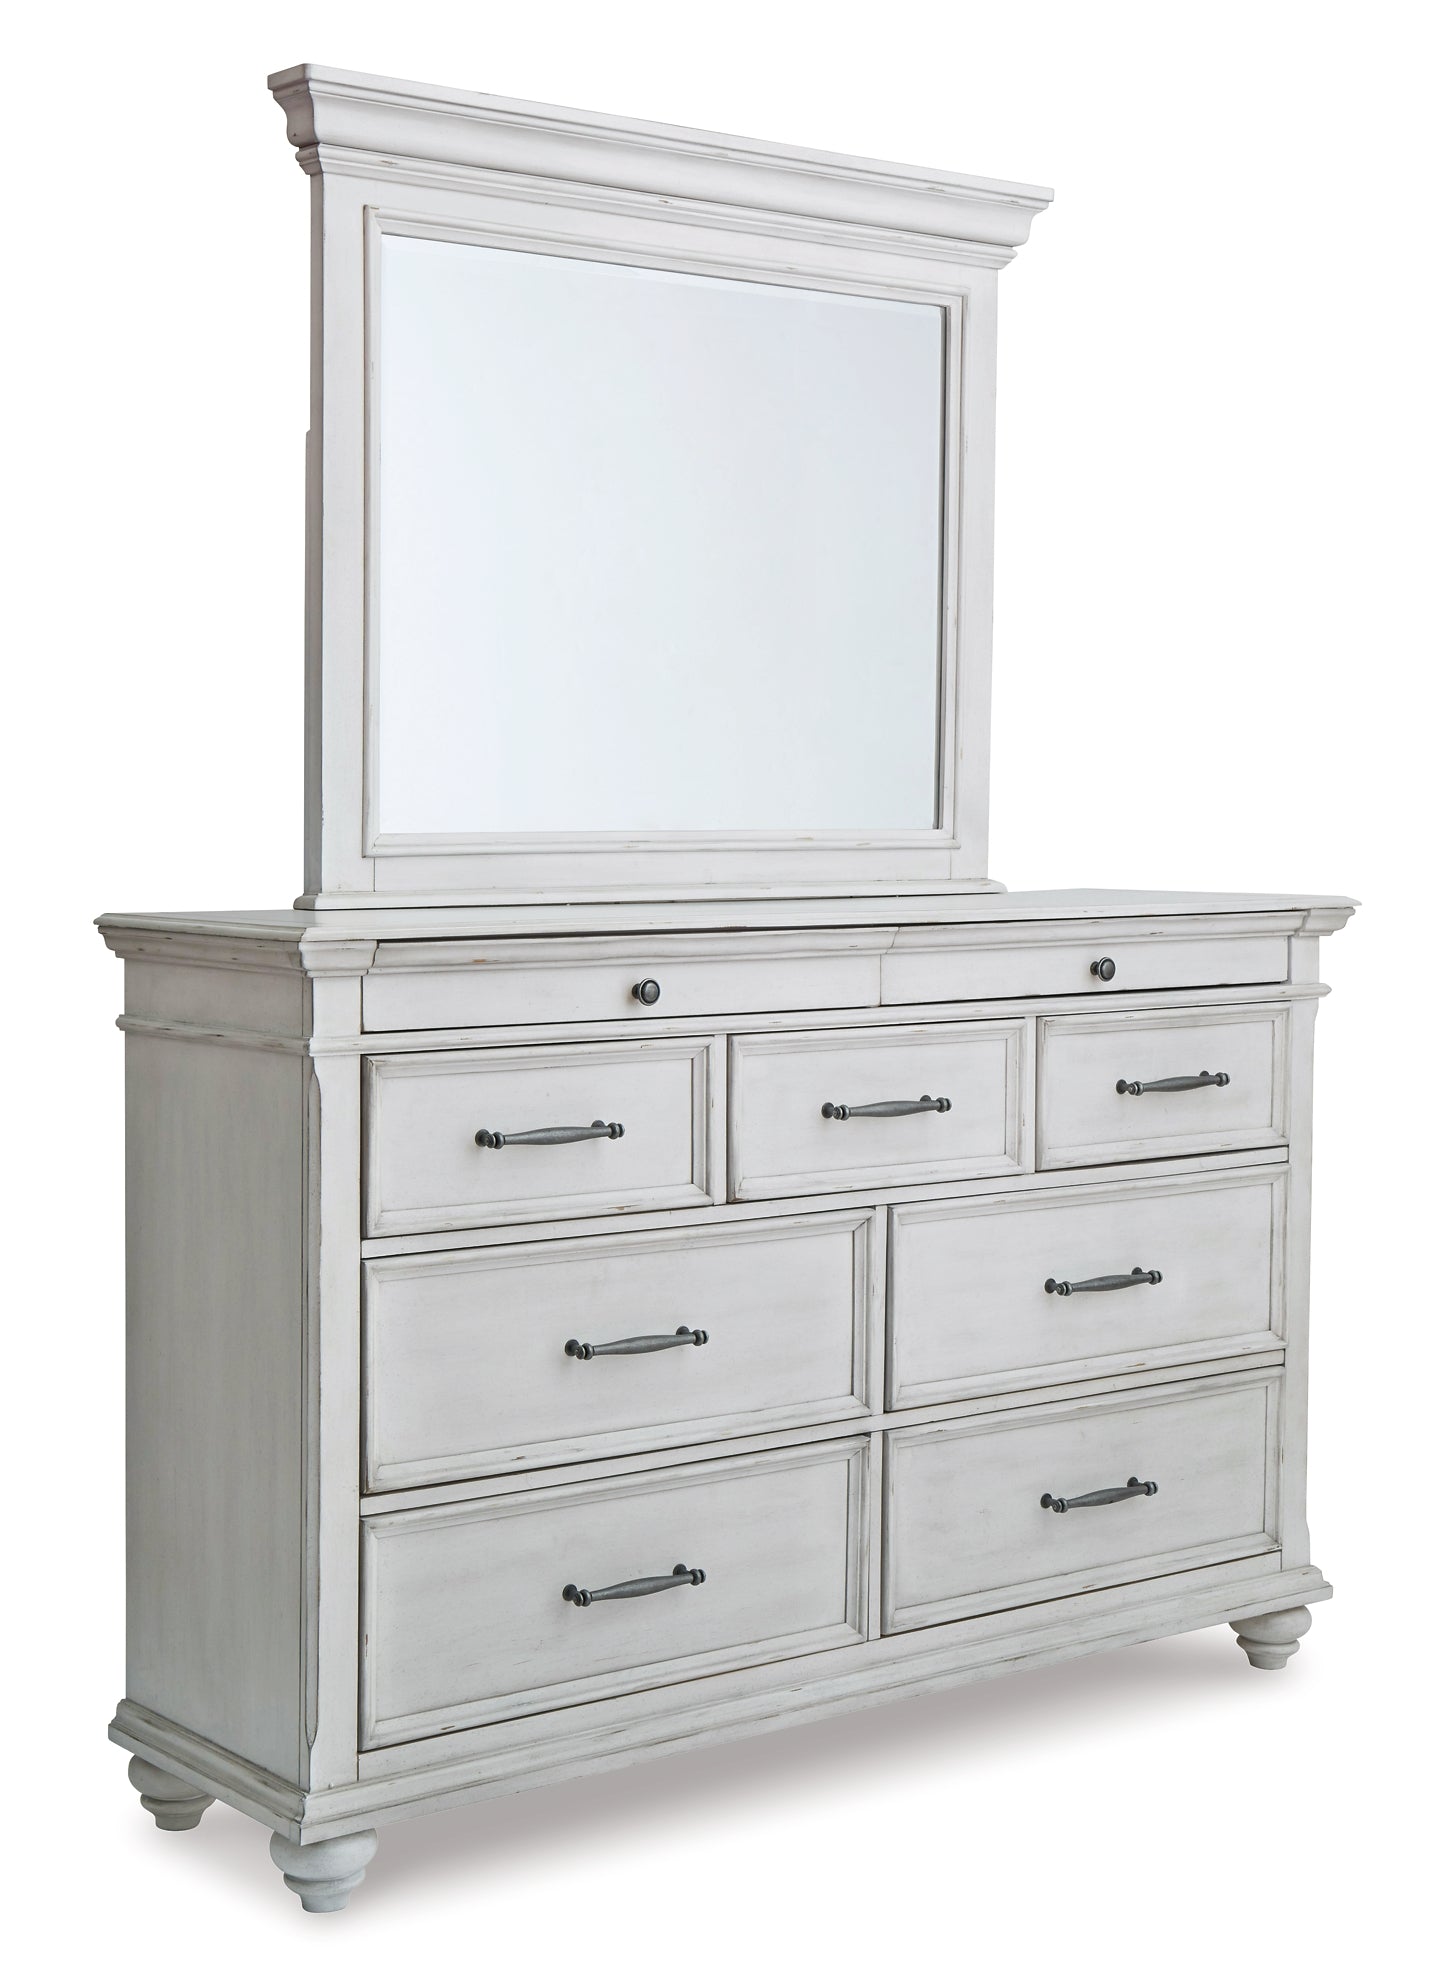 Kanwyn King Panel Bed with Storage with Mirrored Dresser and Chest JB's Furniture  Home Furniture, Home Decor, Furniture Store